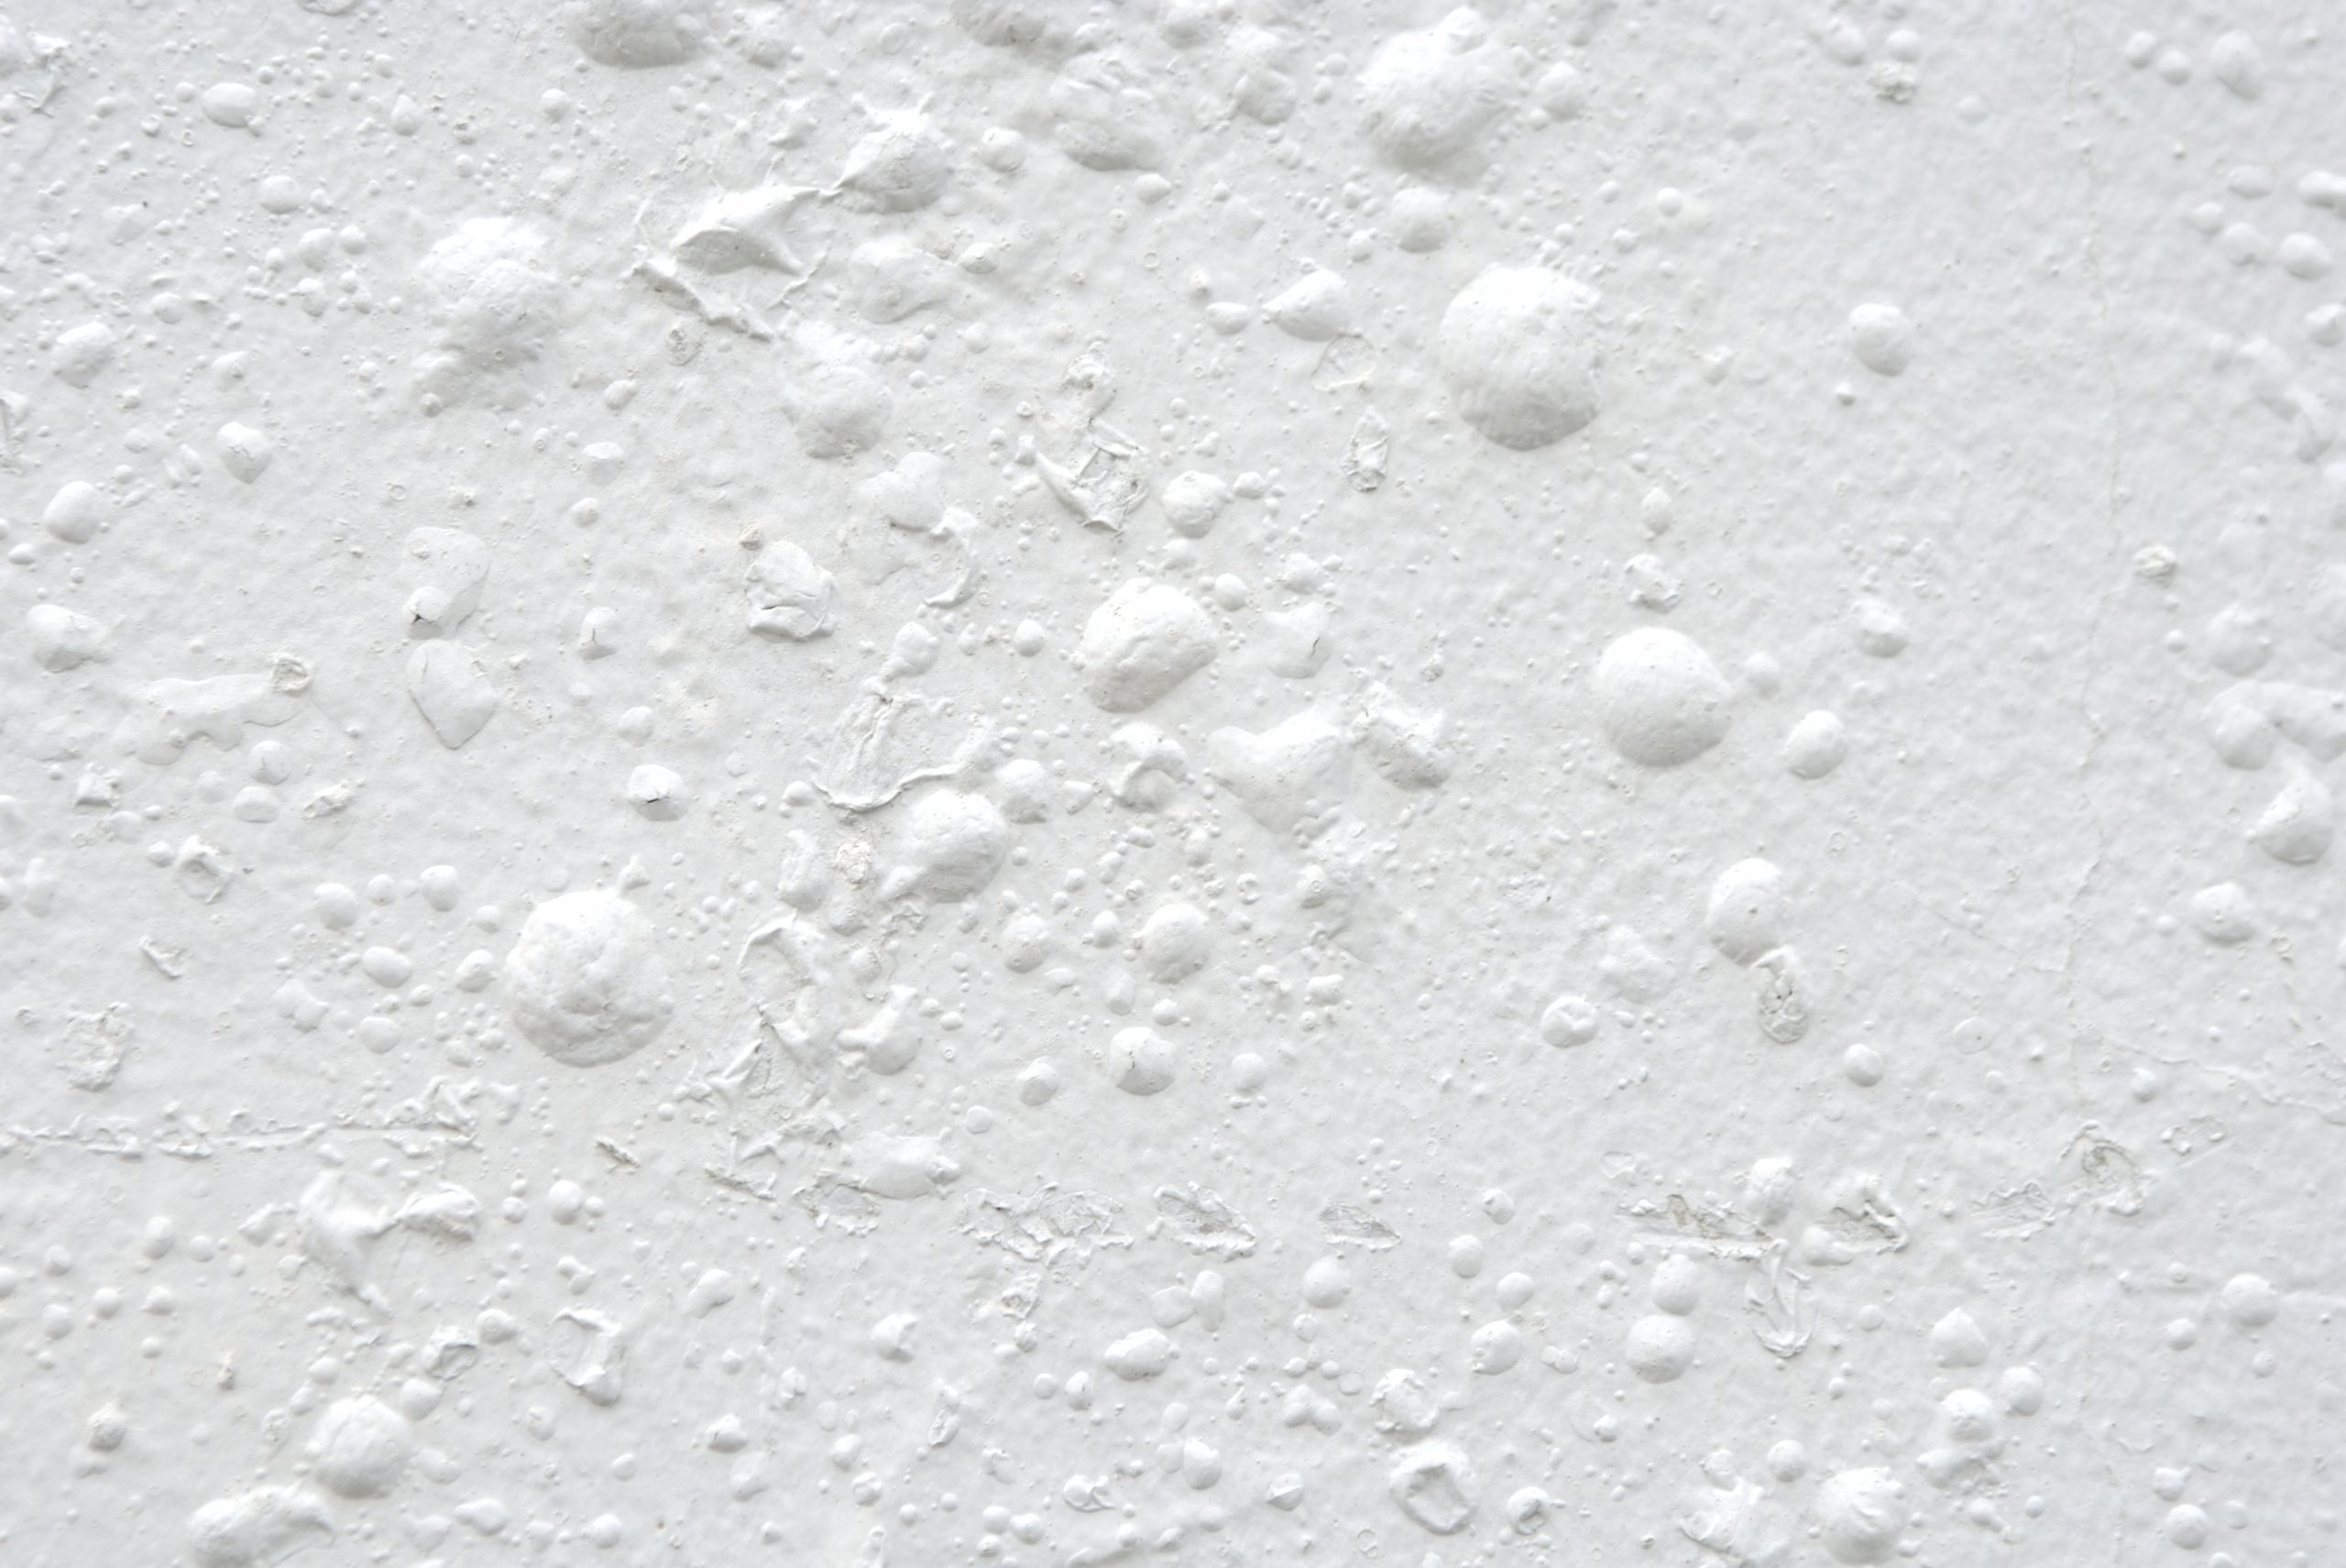 White Wall Background Full Frame with Bubbles